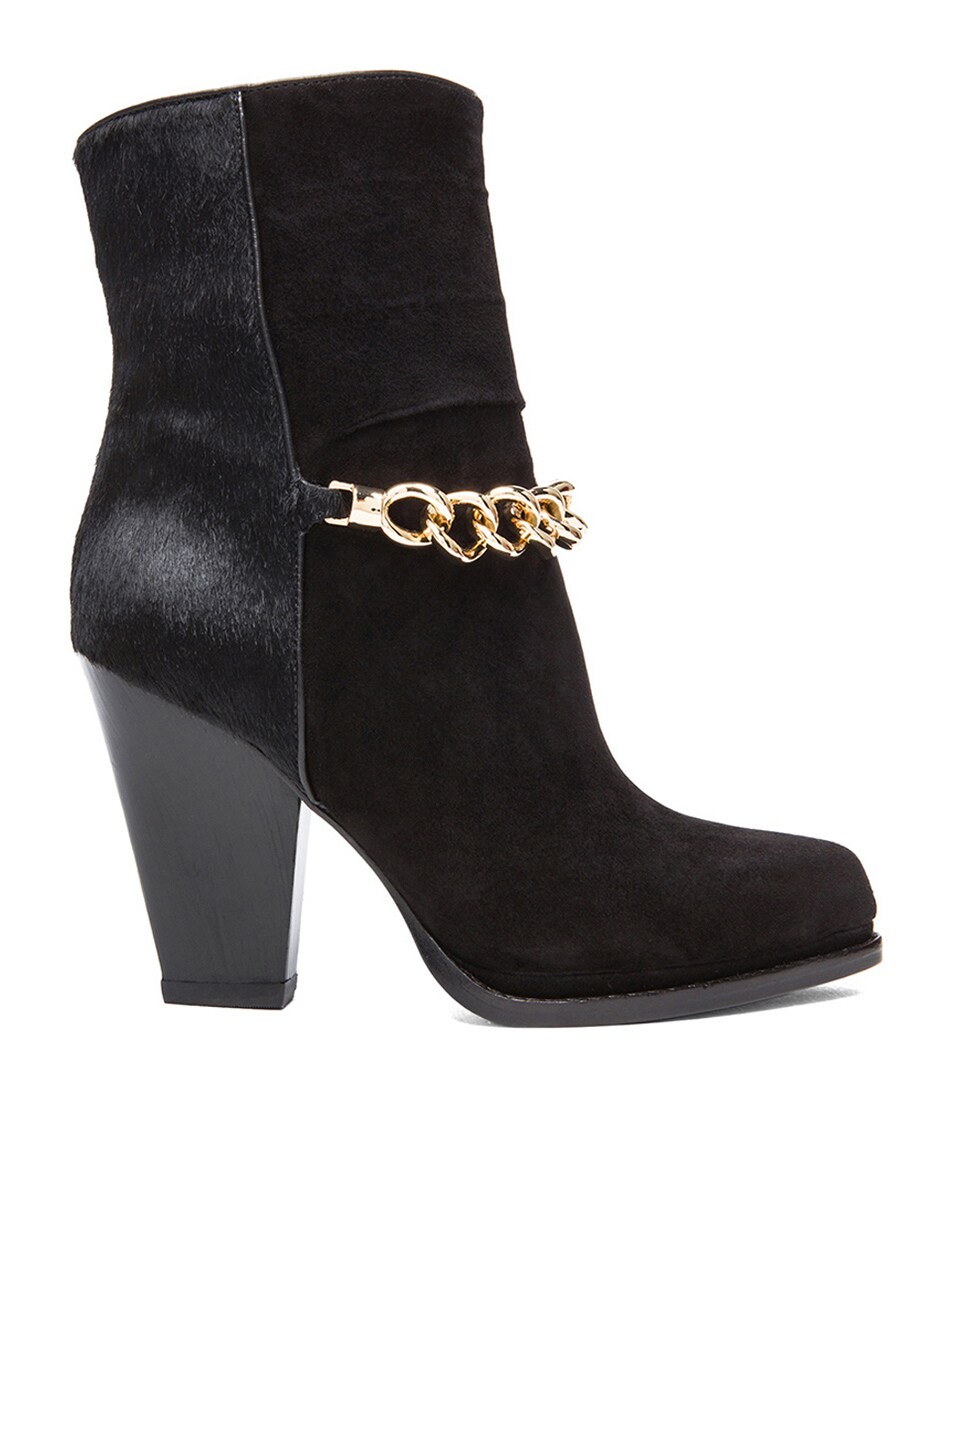 Image 1 of 3.1 phillip lim Chain High Heel Suede & Calf Hair Boots in Black